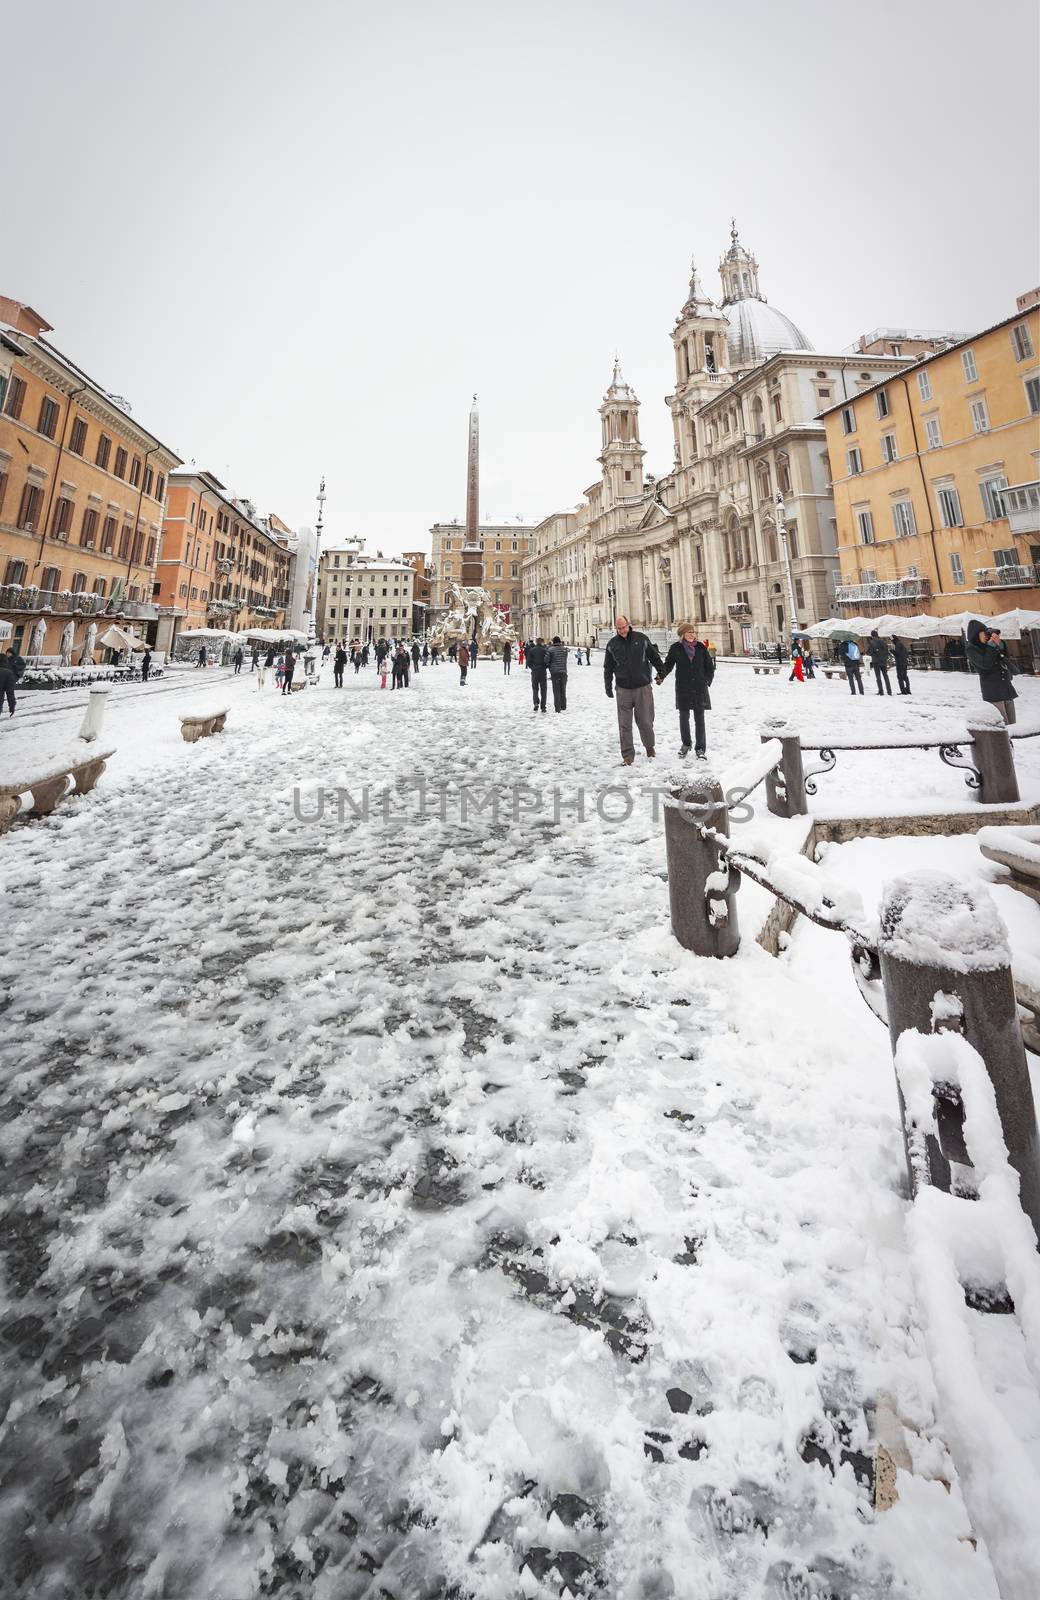 Piazza Navona in Rome covered with snow with citizens and tourists walking in wonder after the unusual snowfall of February 26th 2018 by rarrarorro